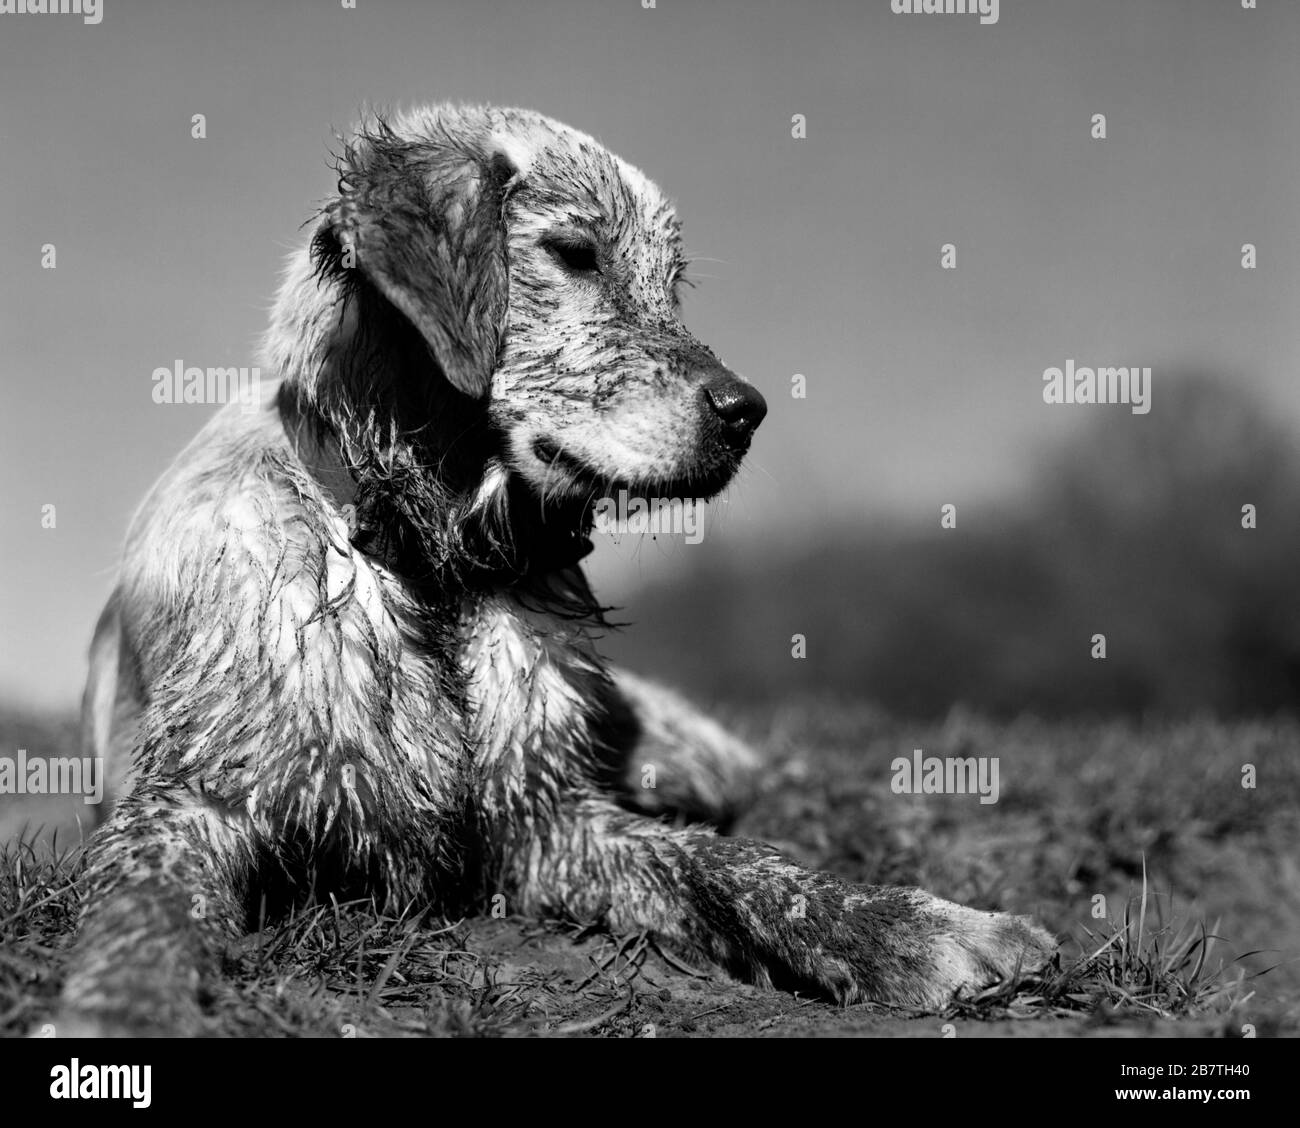 Golden Retriever dog covered in mud Stock Photo